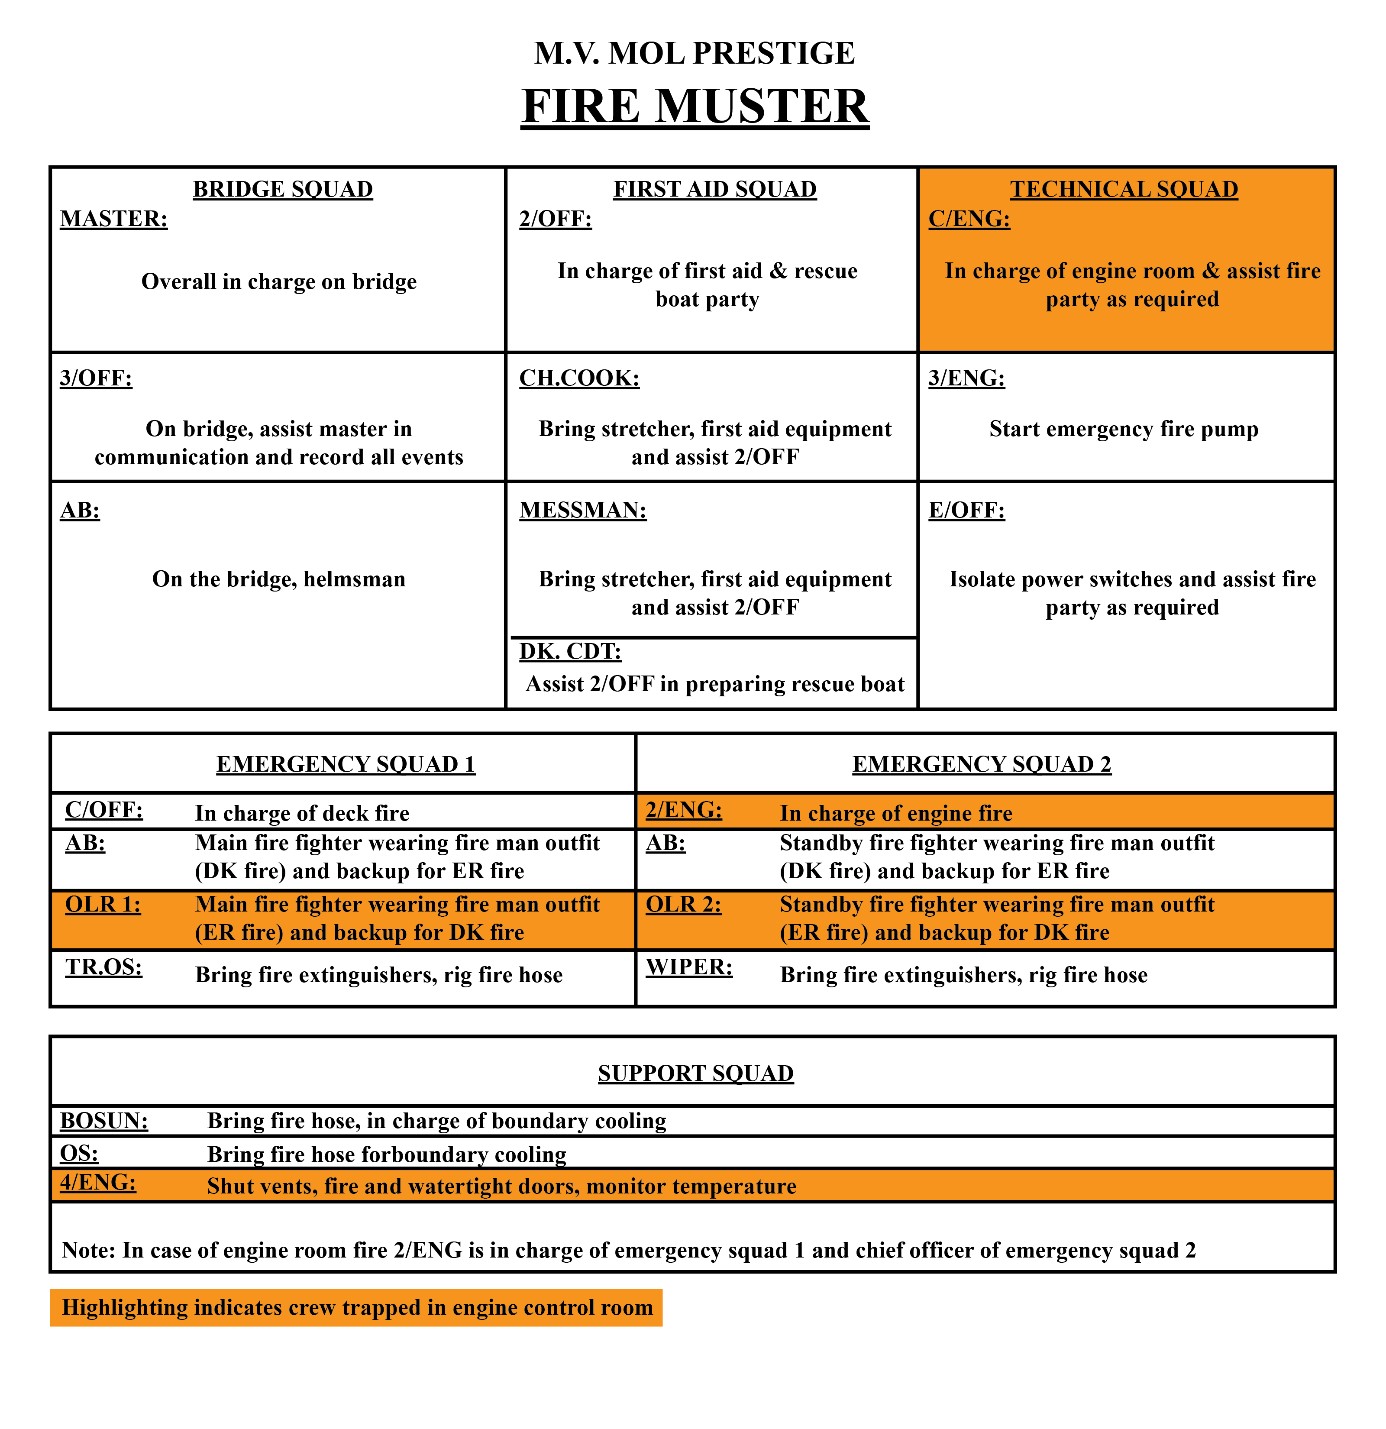 TSB  reproduction of the fire muster list for the <em>MOL Prestige</em>. Highlighting  indicates which crew members were trapped in the engine control room. (Source:  TSB, with data obtained from original <em>MOL  Prestige</em> muster list)